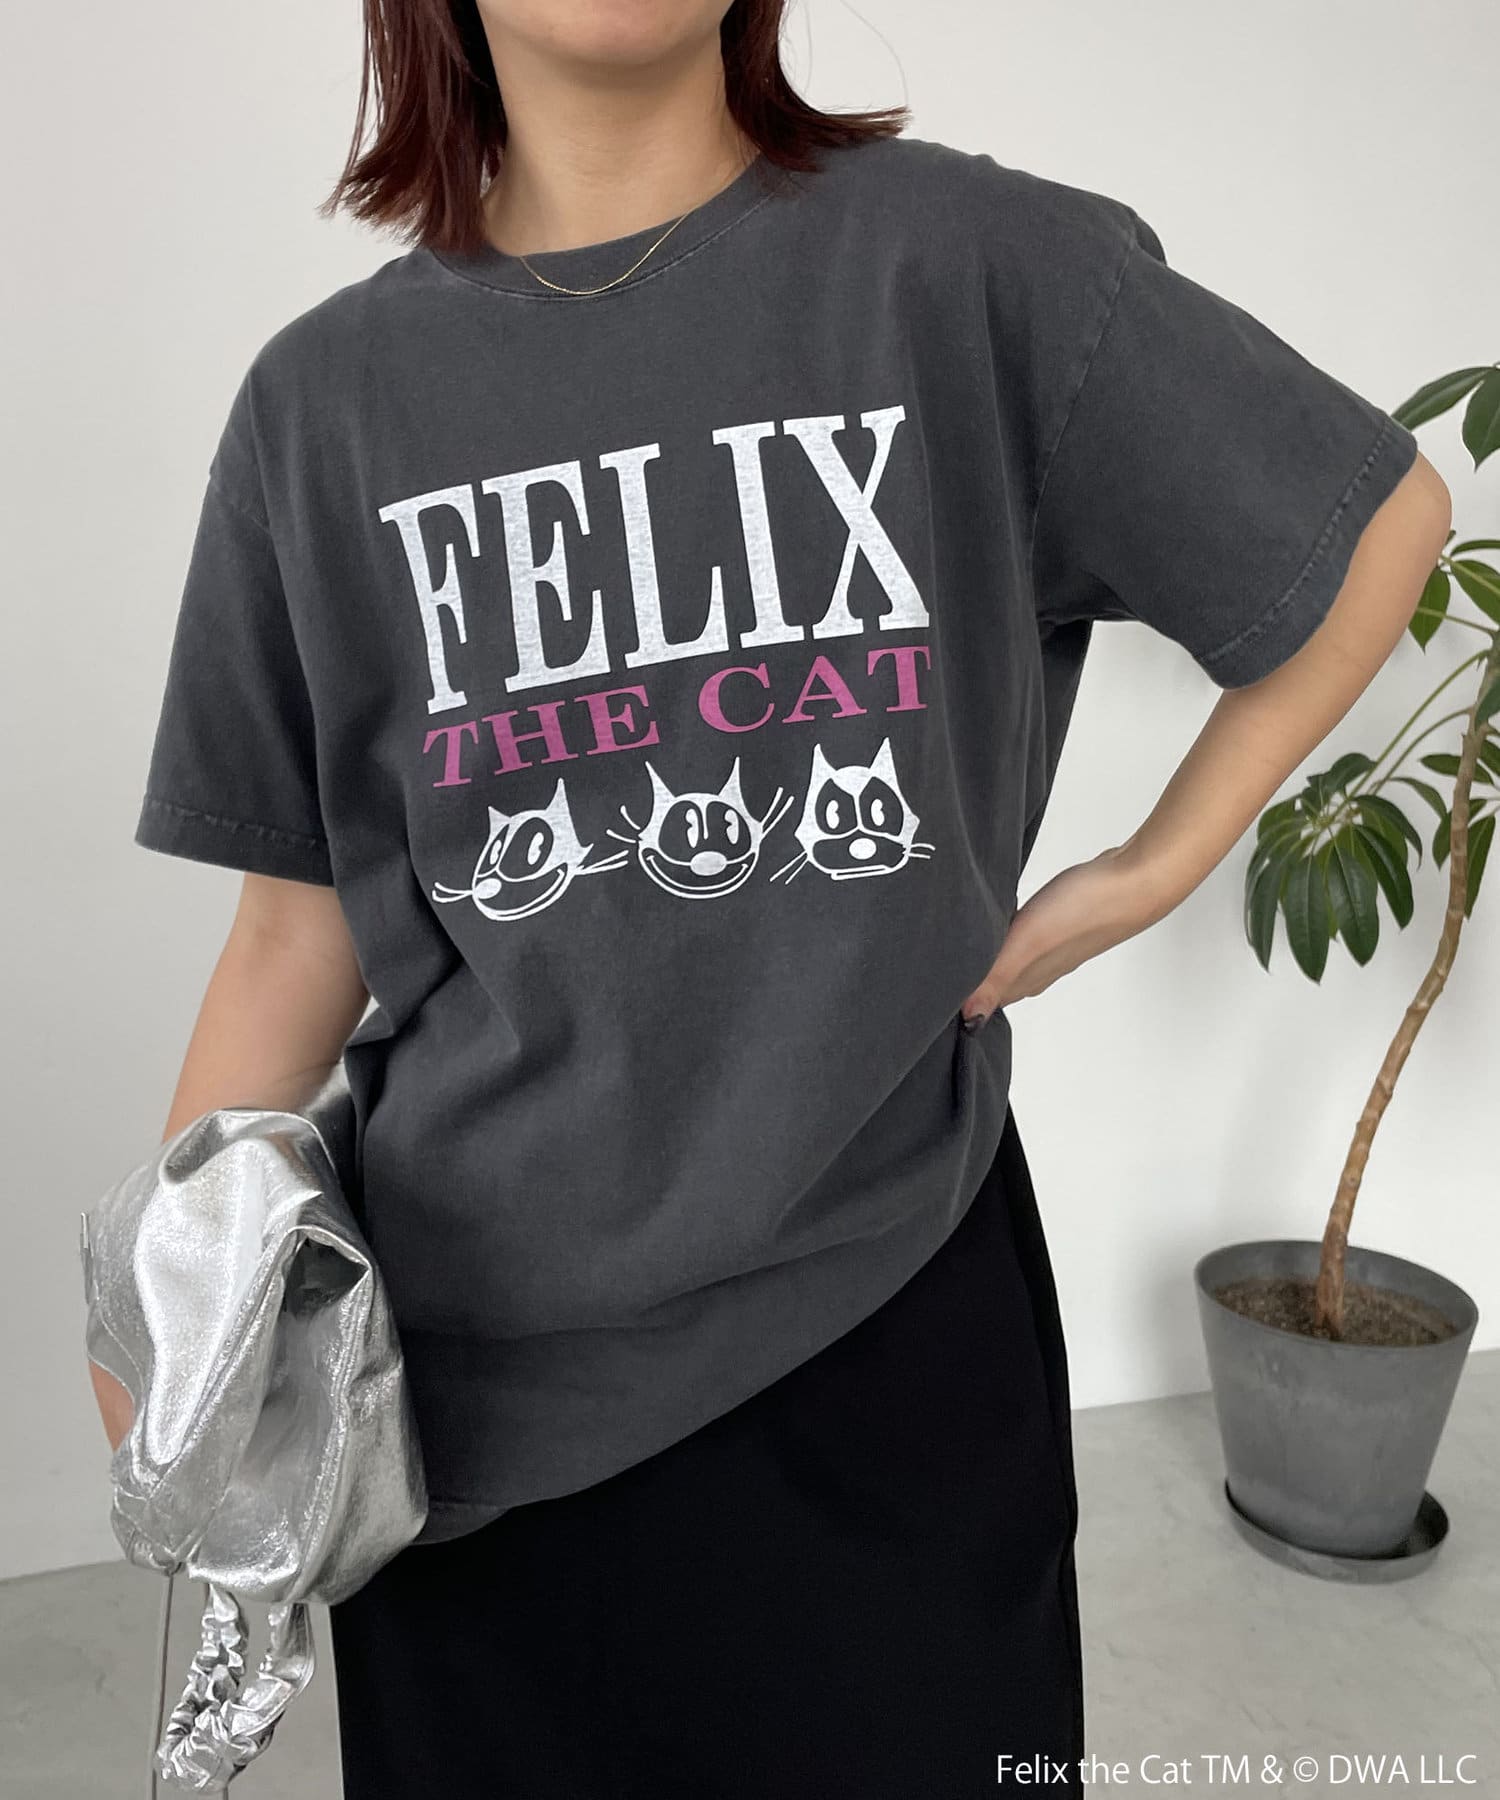 CAPRICIEUX LE'MAGE(カプリシュレマージュ) 〈GOOD ROCK SPEED〉FELIX Tシャツ